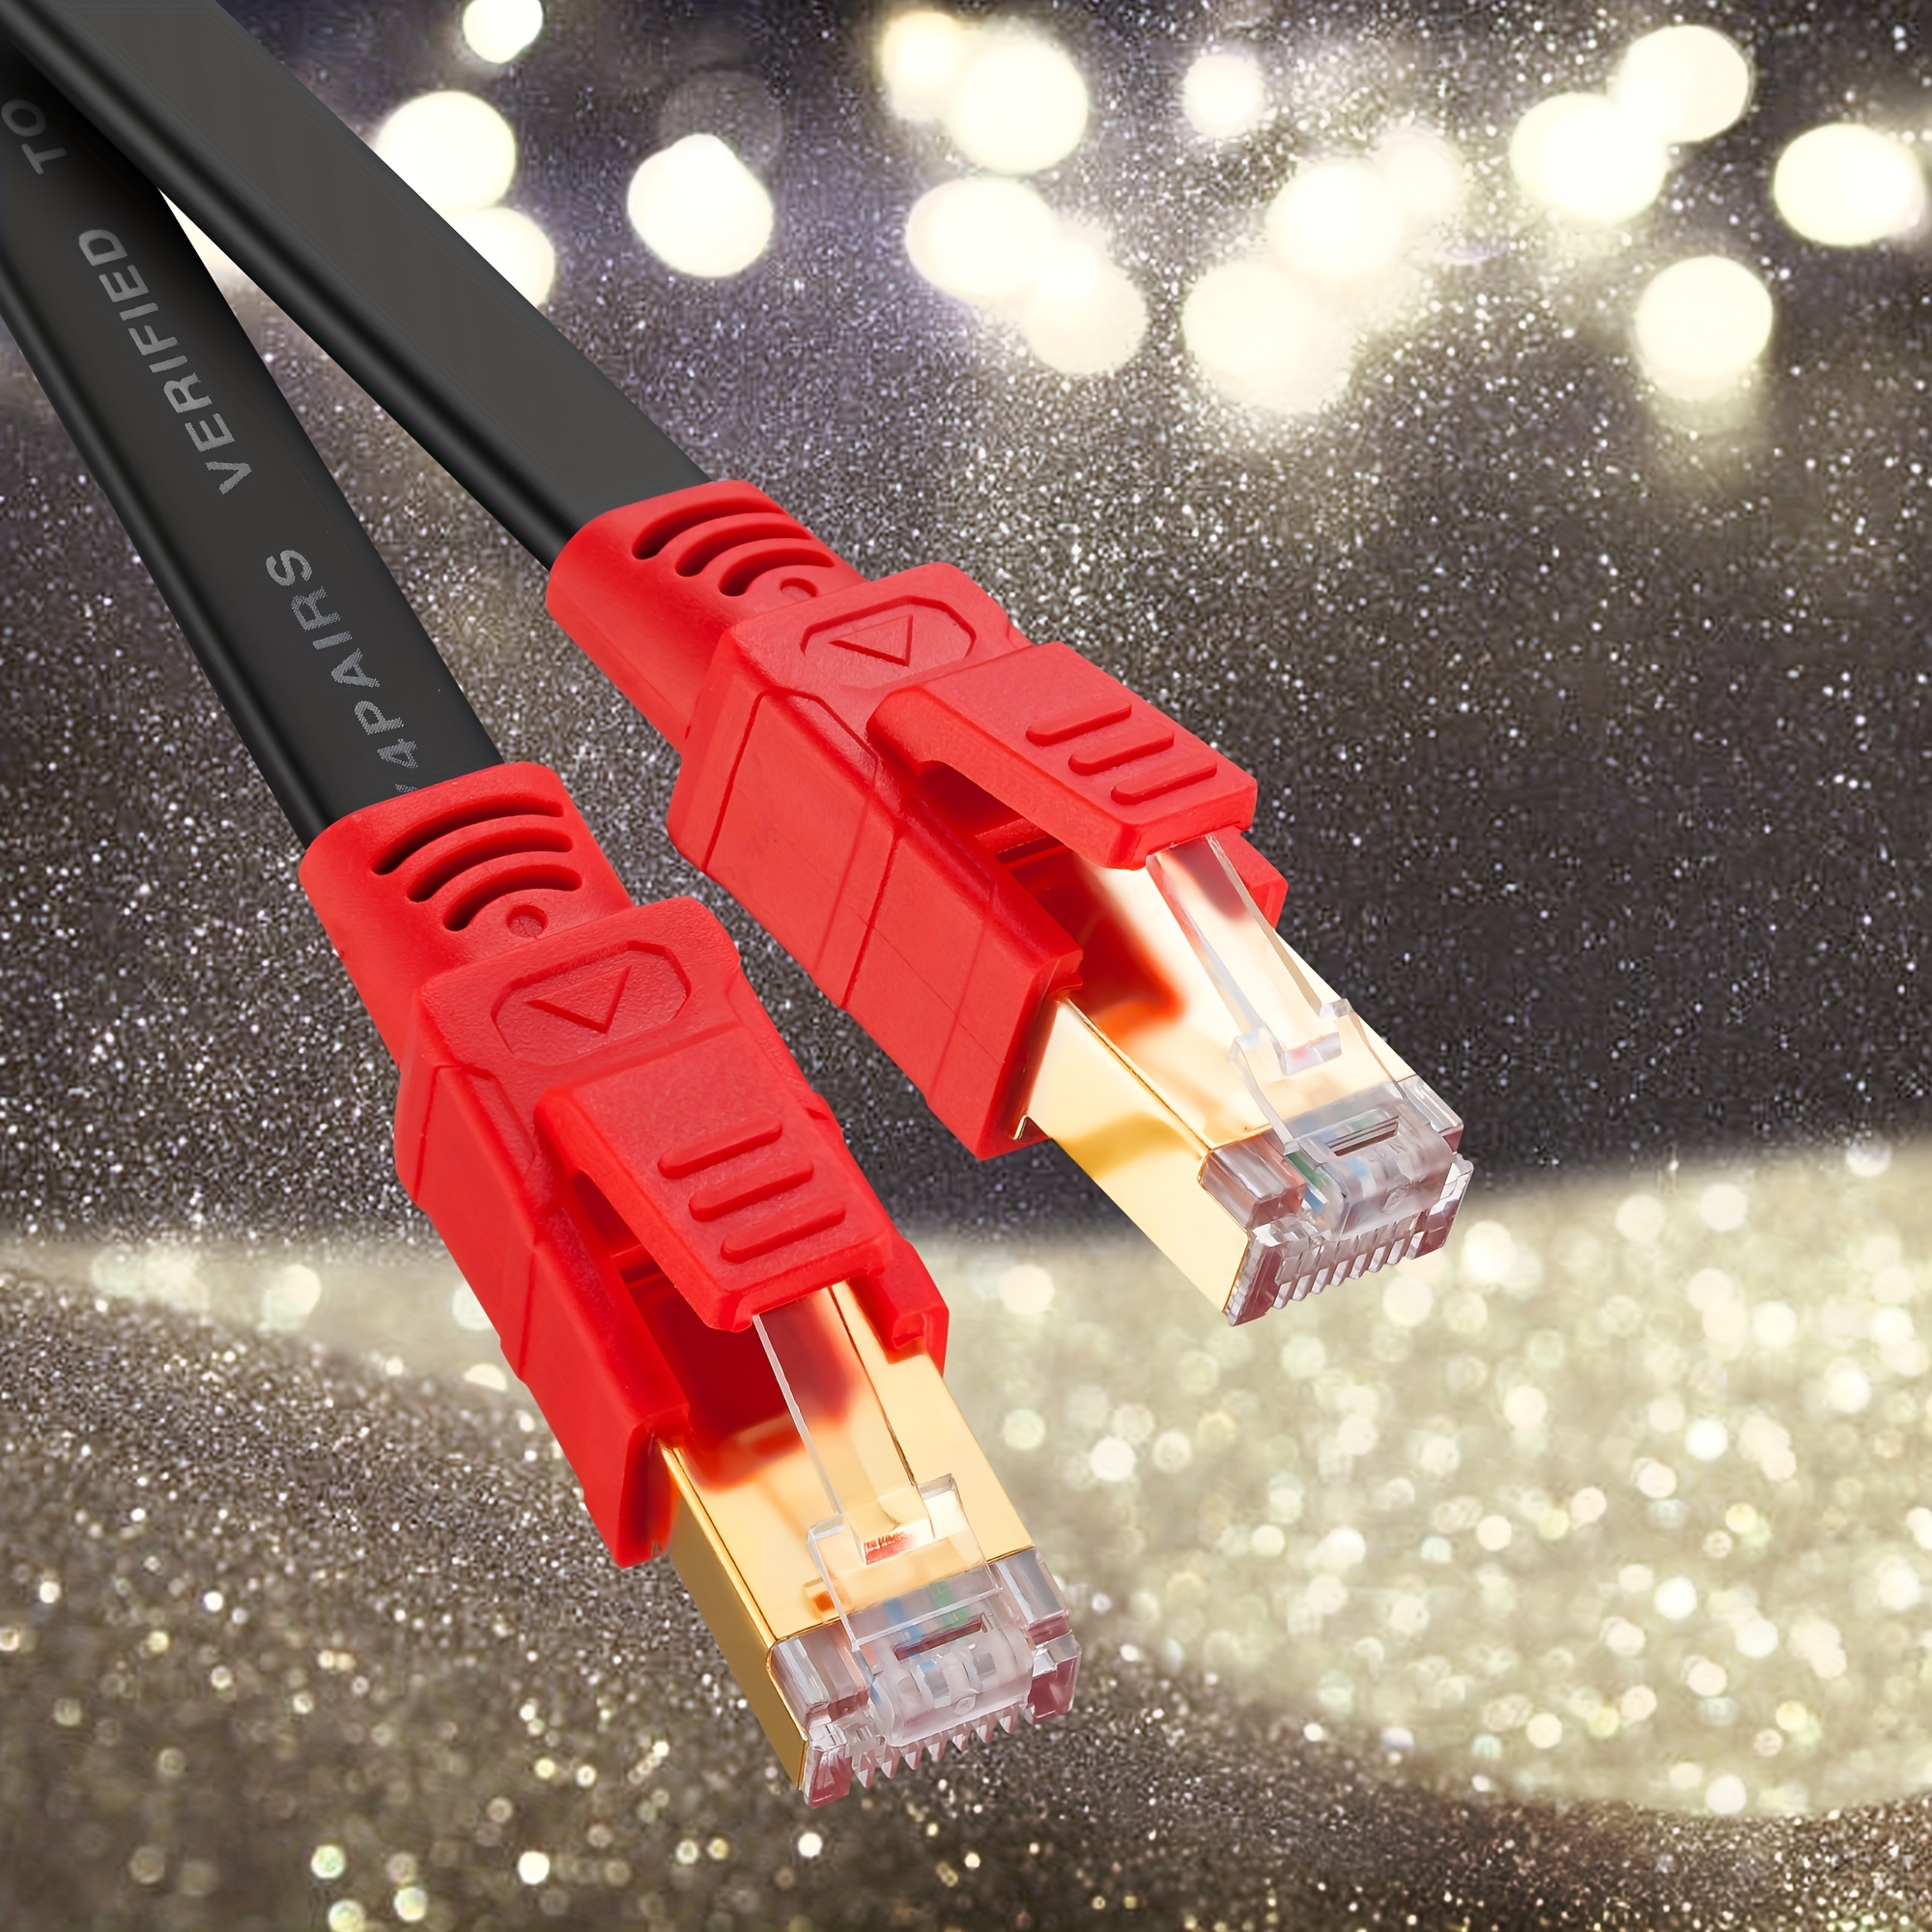 Cat 7 Ethernet Cable High Speed Shielded Flat Internet Cable - Temu